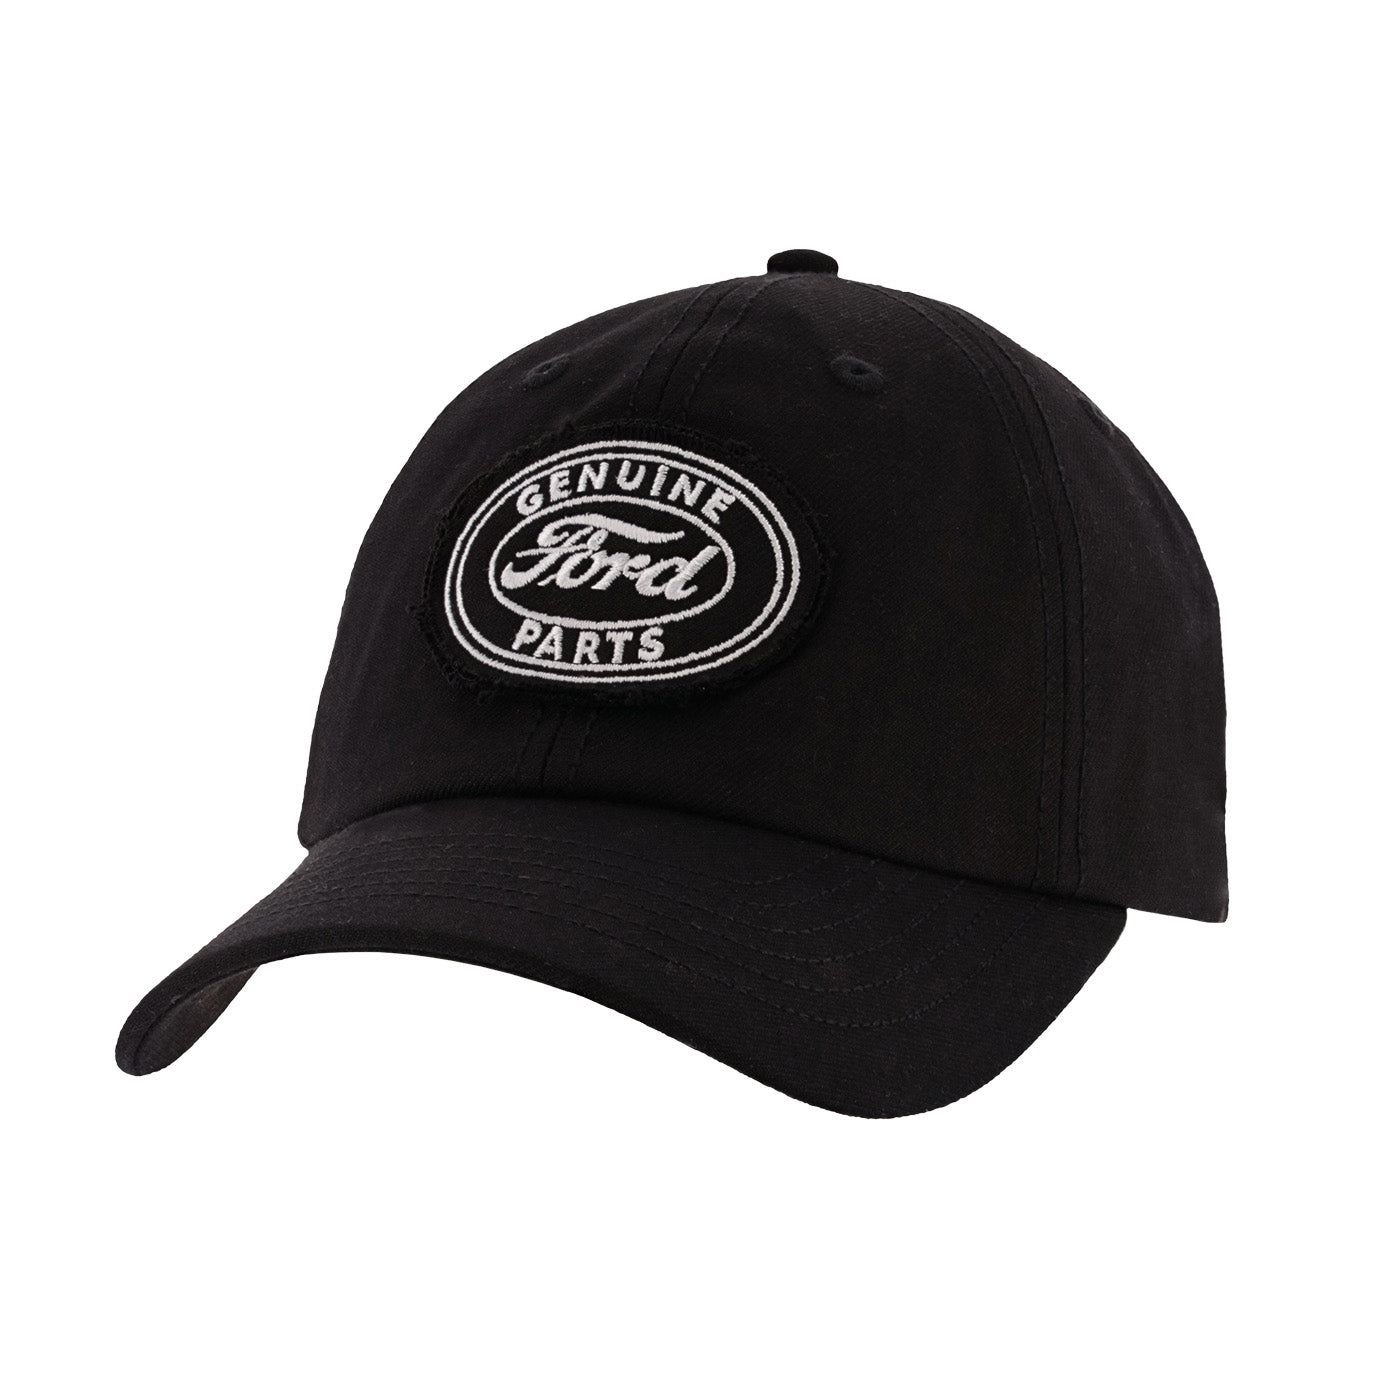 Ford Genuine Ford Parts Slideback Hat- Official Ford Merchandise